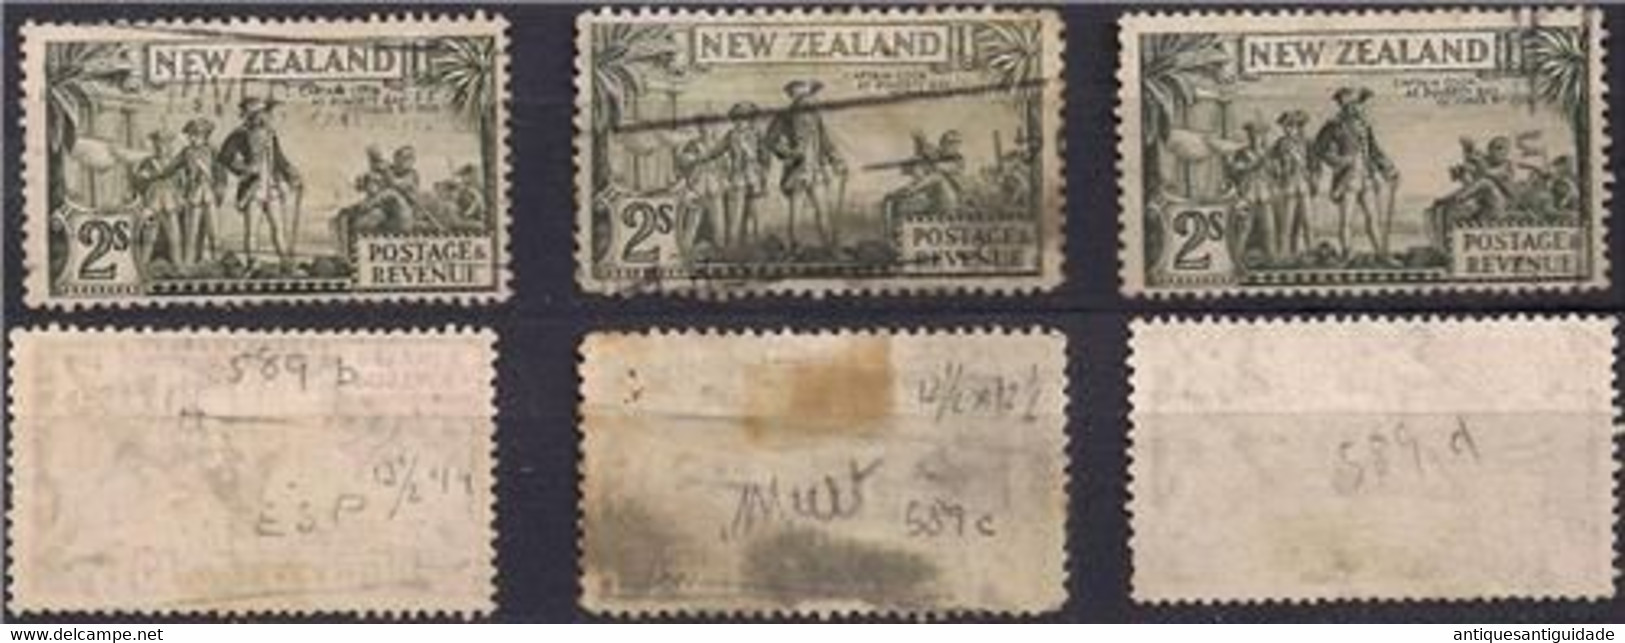 3x NEW ZEALAND 1935-36 2sh Olive-green Sg 568b,c,d Used With Varieties Dif Perfs - Used Stamps